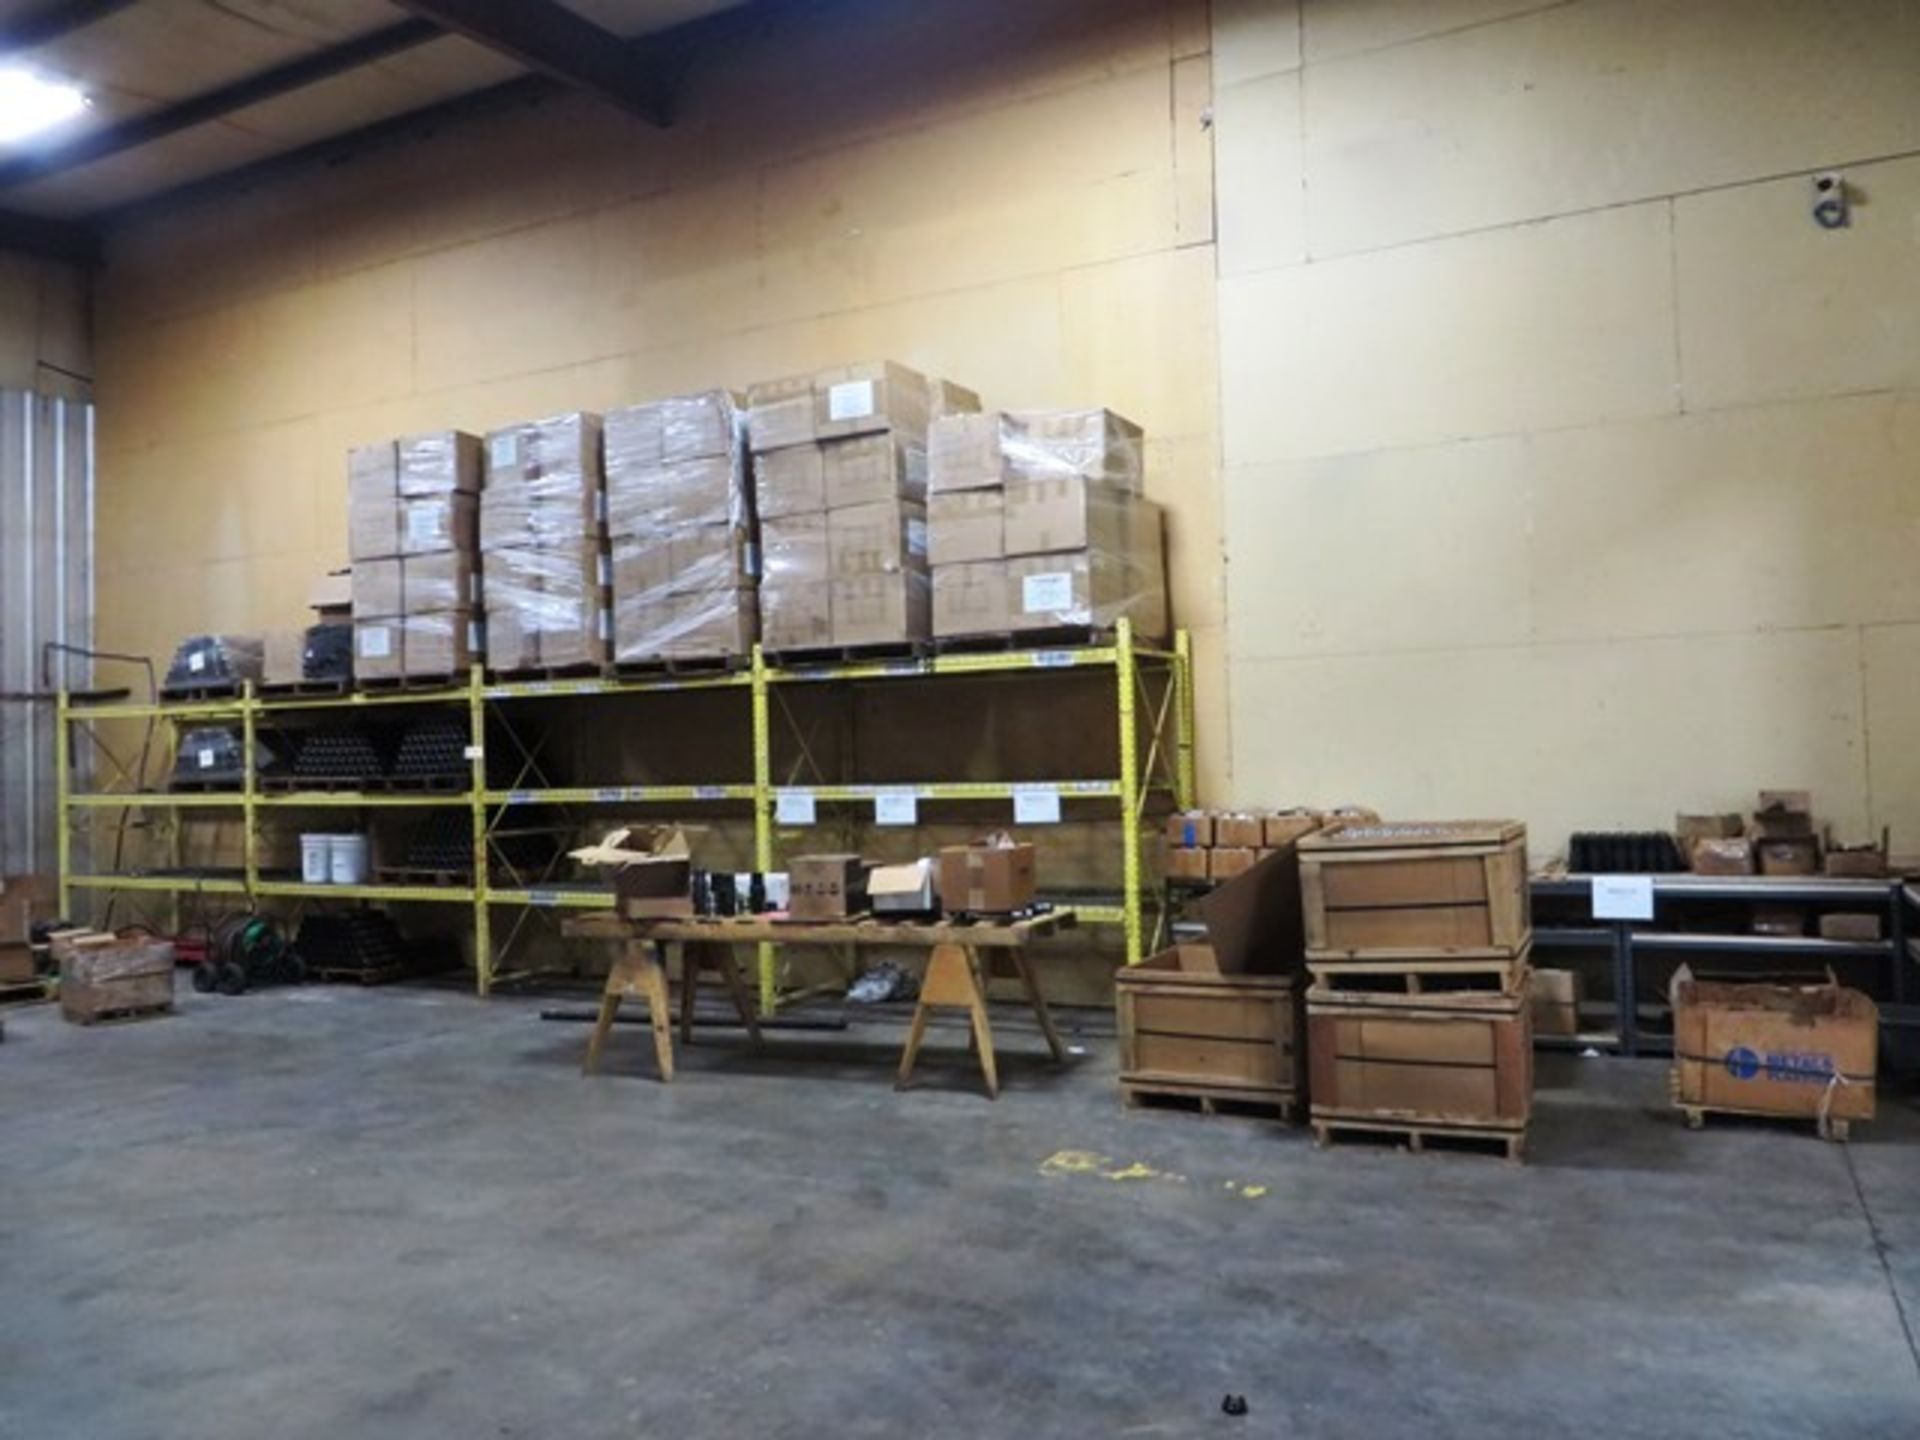 4 Sections of Pallet Racking & Shelving with Contents